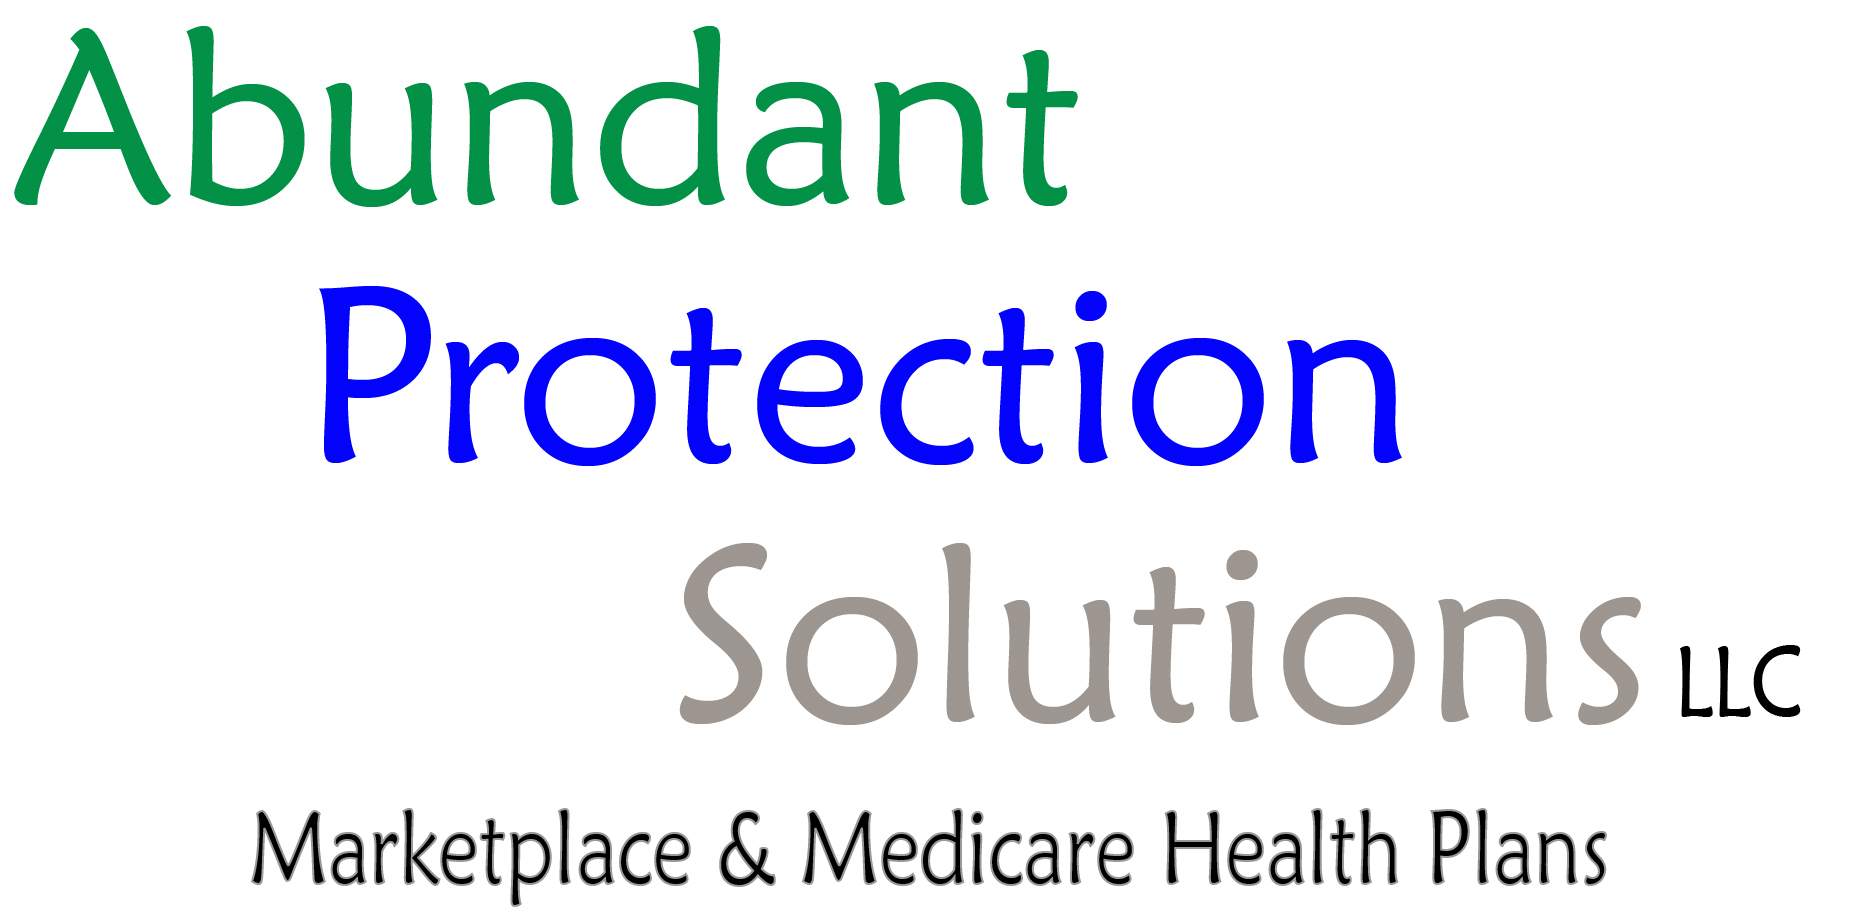 Medicare and Insurance Agent in Texas, Tennesse and Florida / Abundant Protection Solutions 